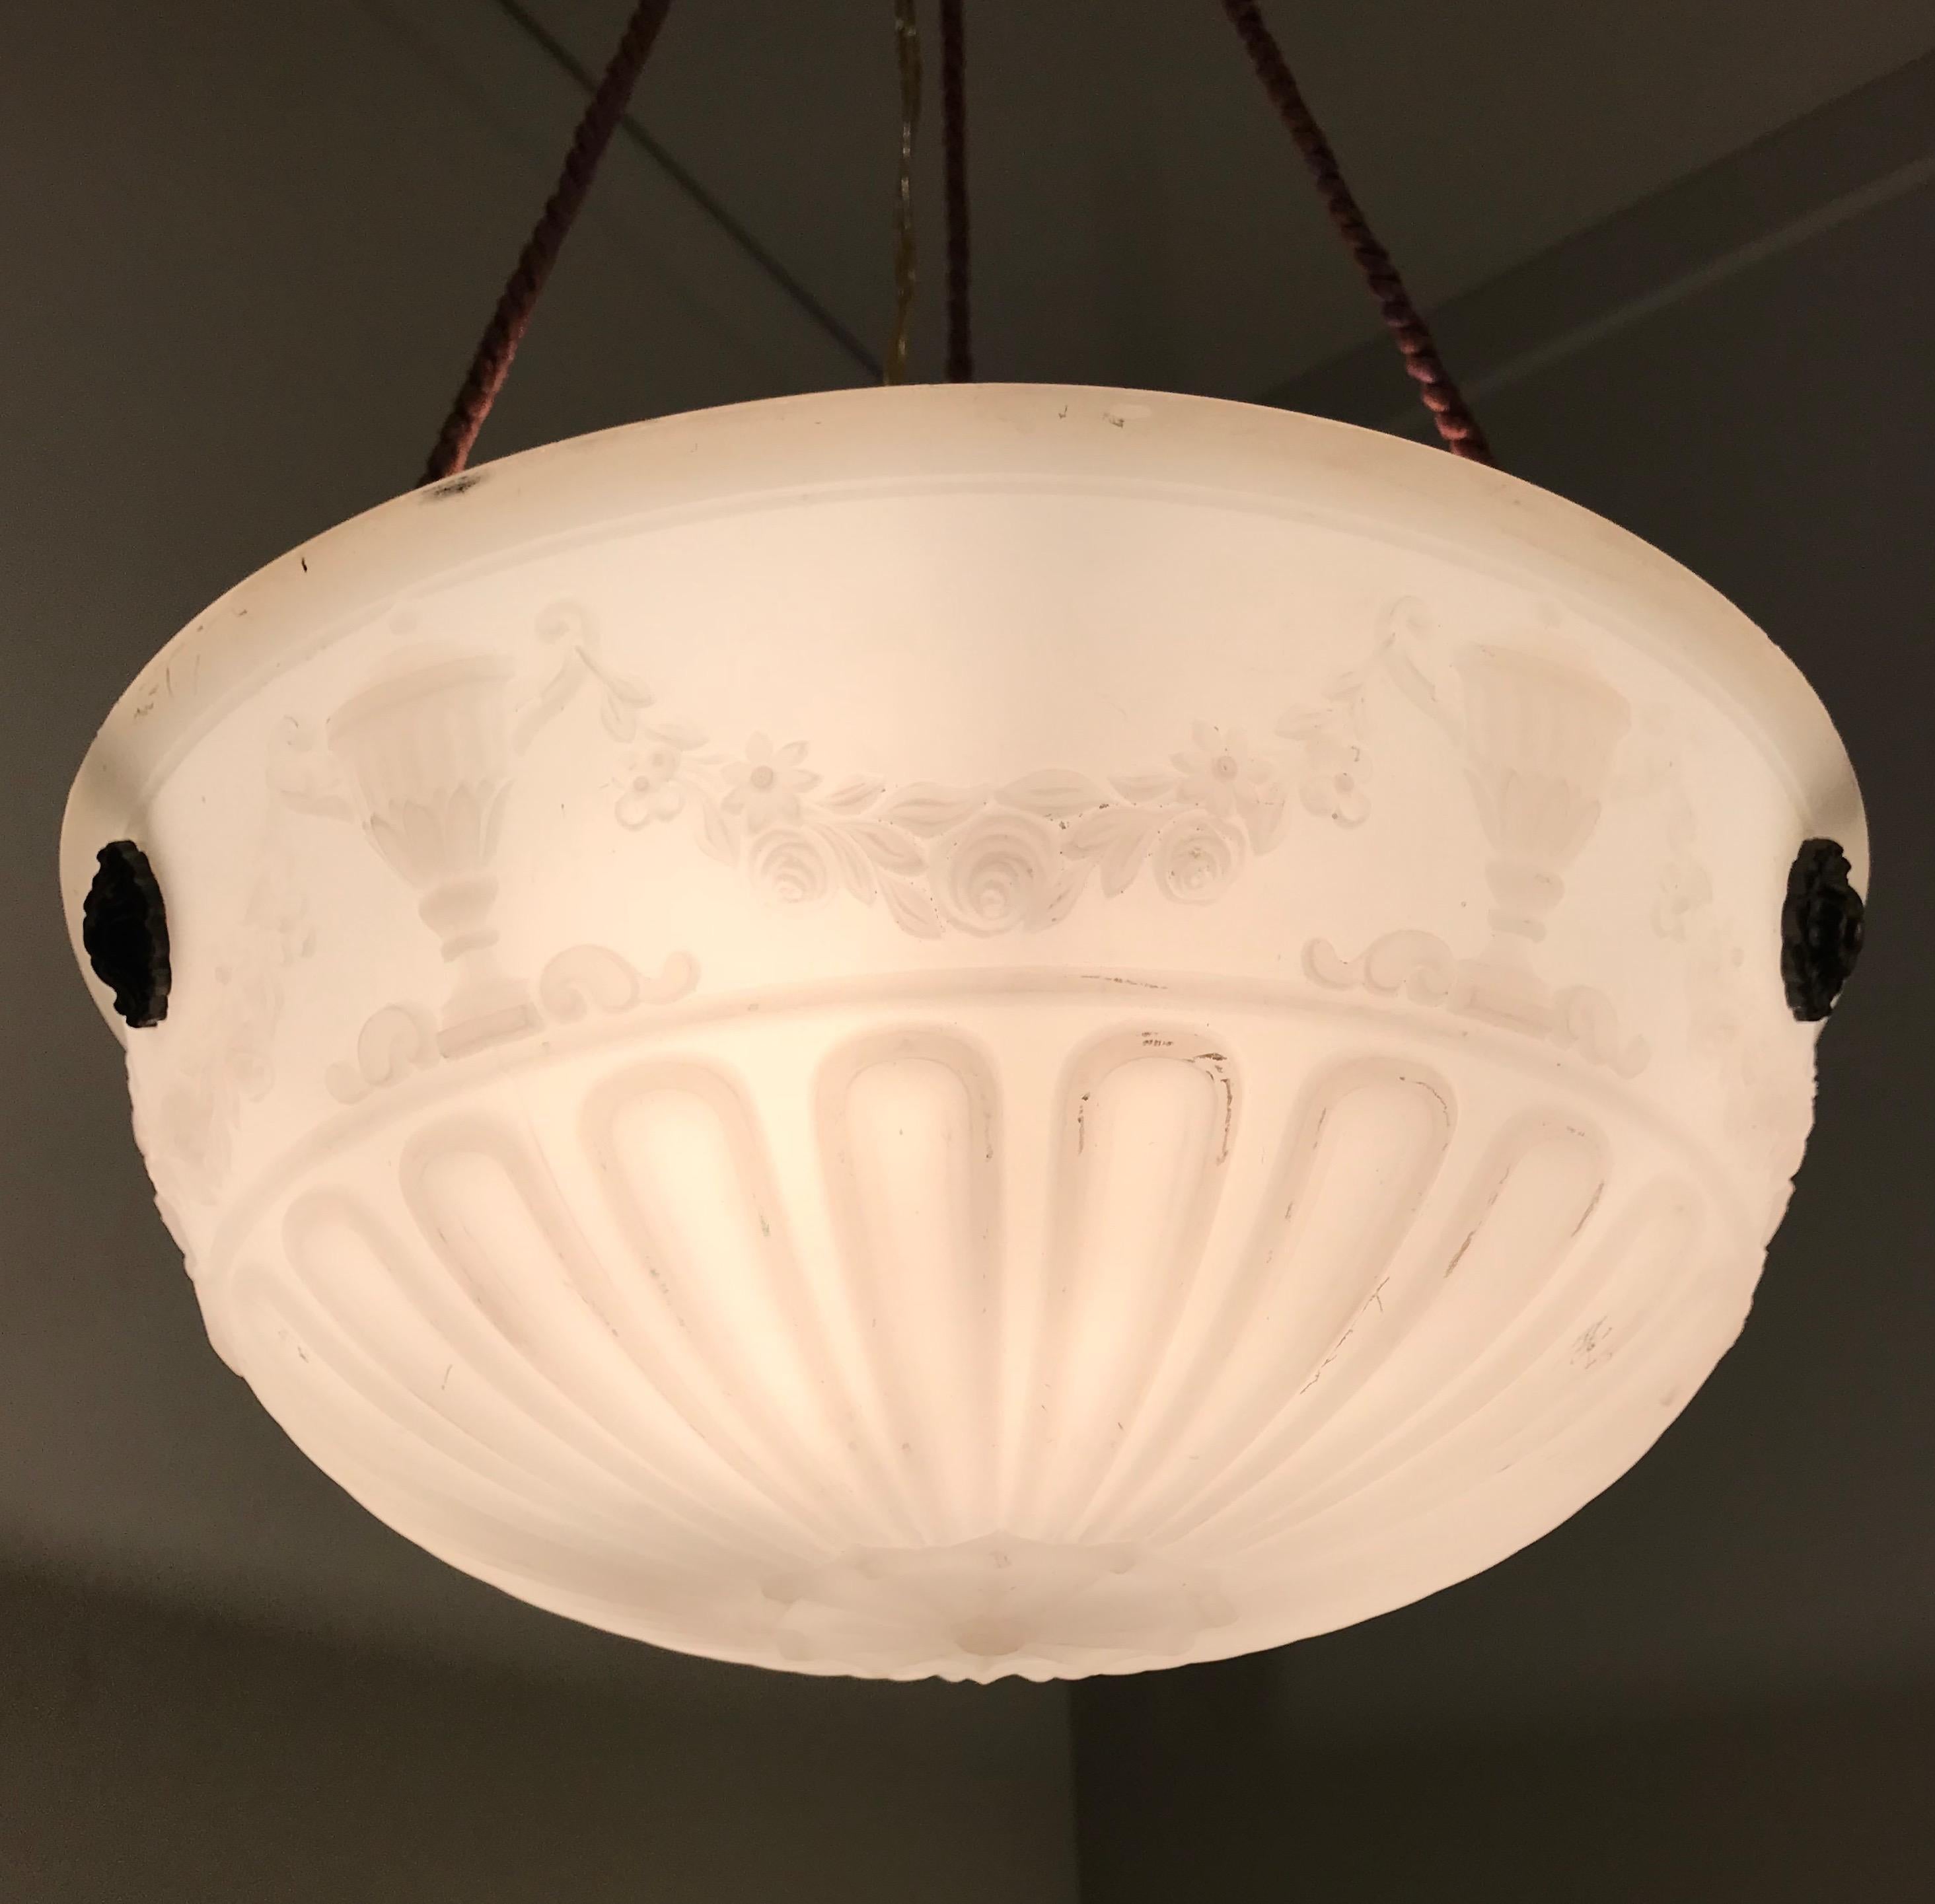 Striking Classical Design Press Glass with Original Rope Pendant / Light Fixture For Sale 6